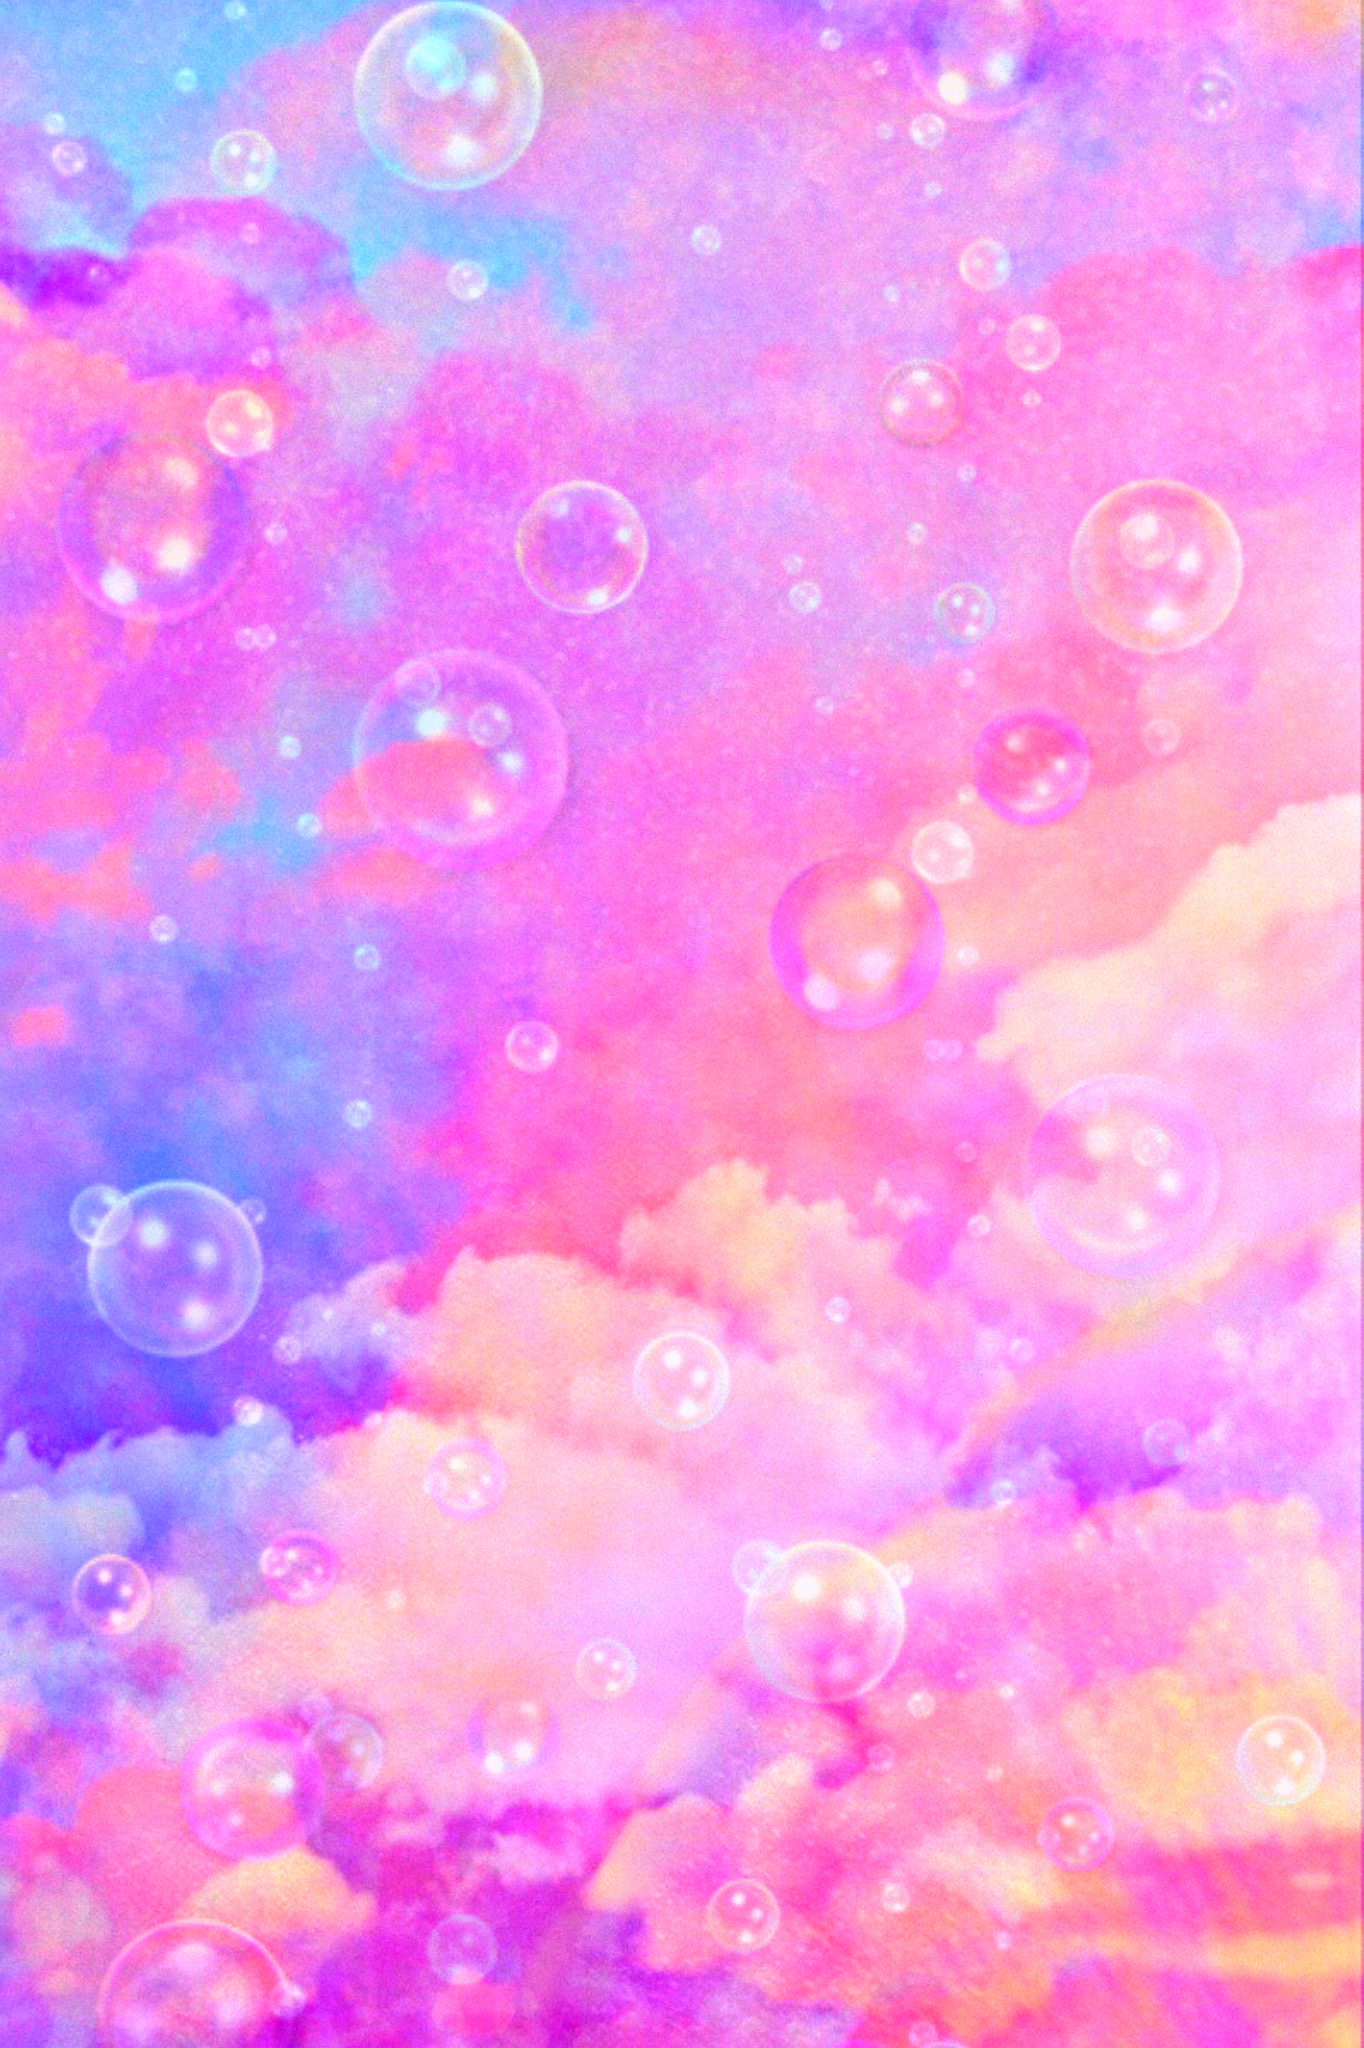 freetoedit glitter sparkle galaxy sky image by @misspink88